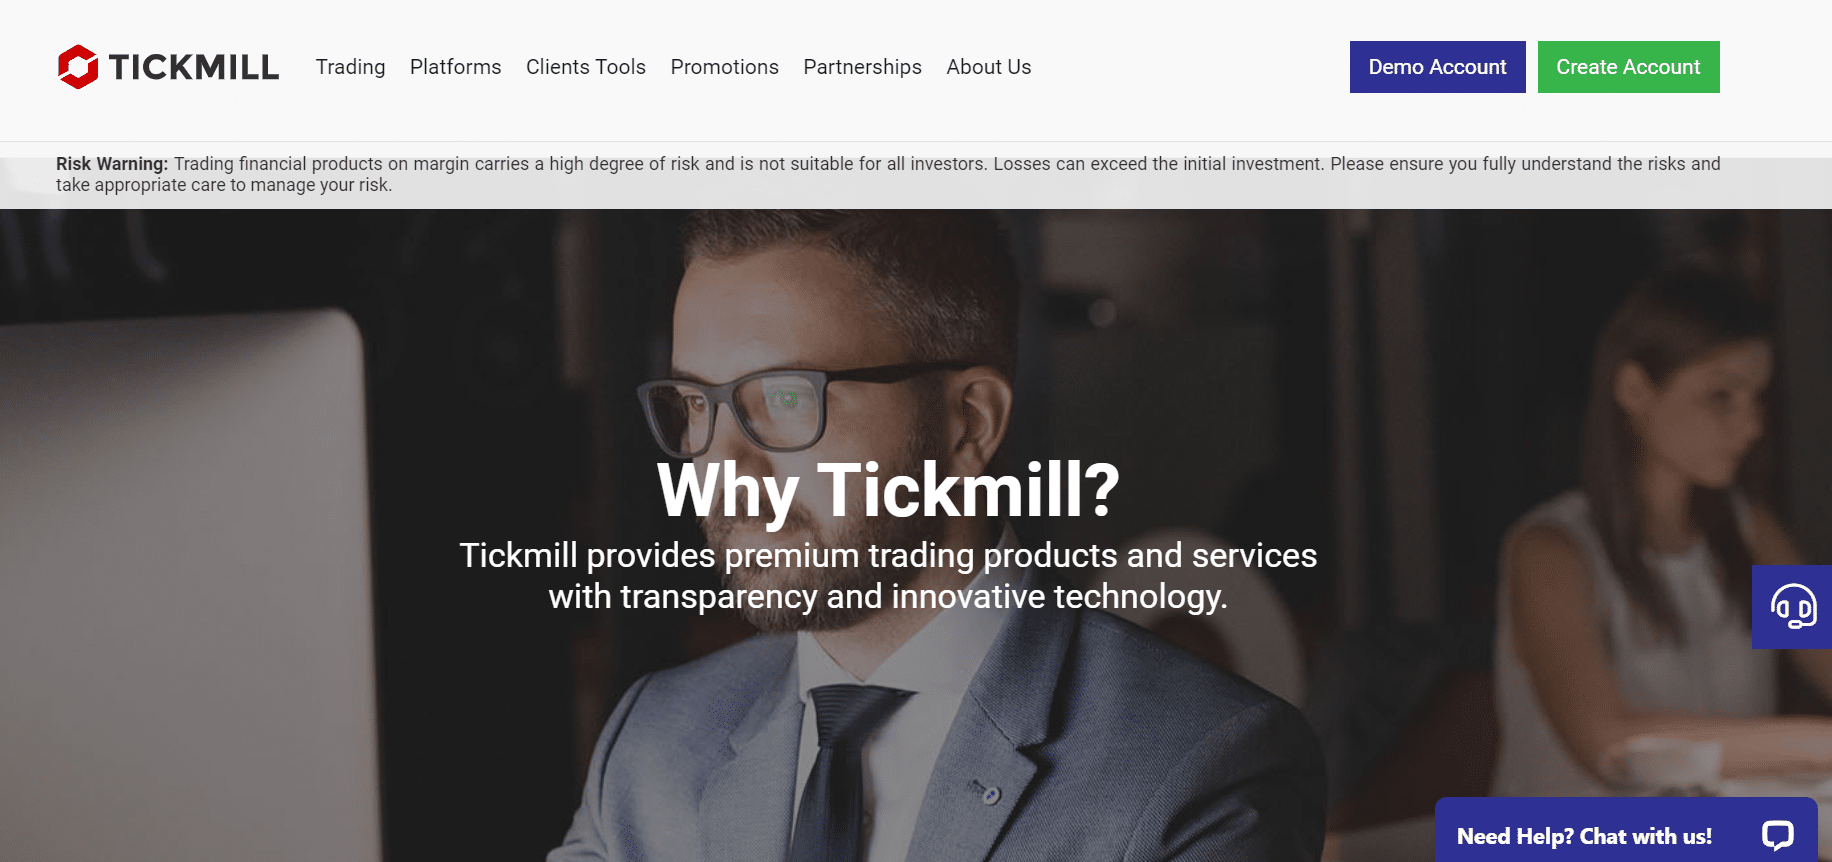 Tickmill Overview